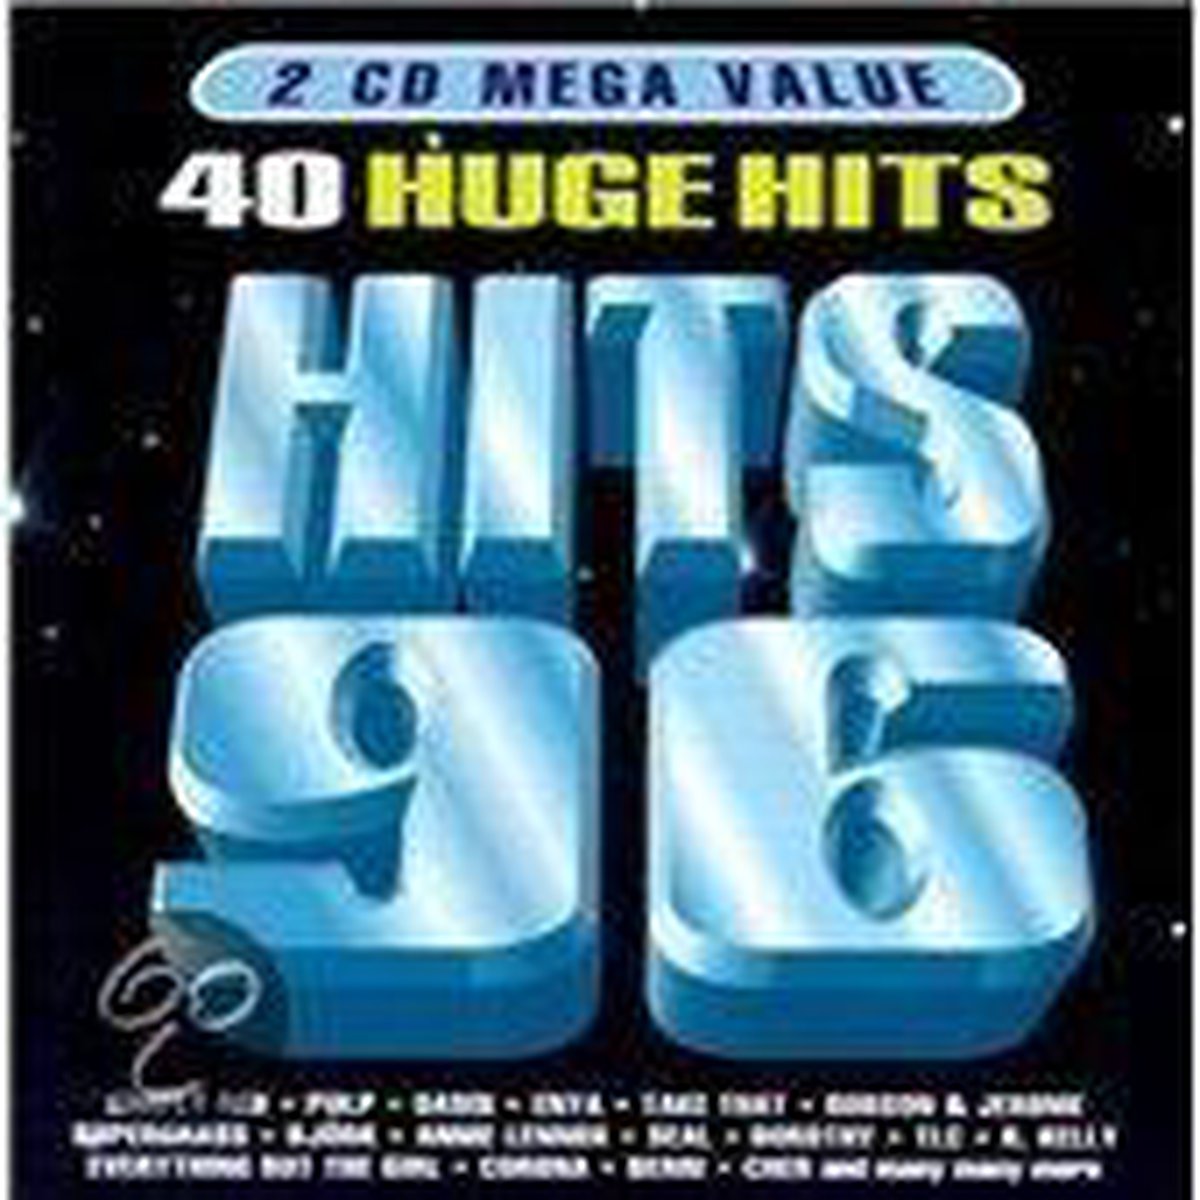 New Hits '96 - various artists